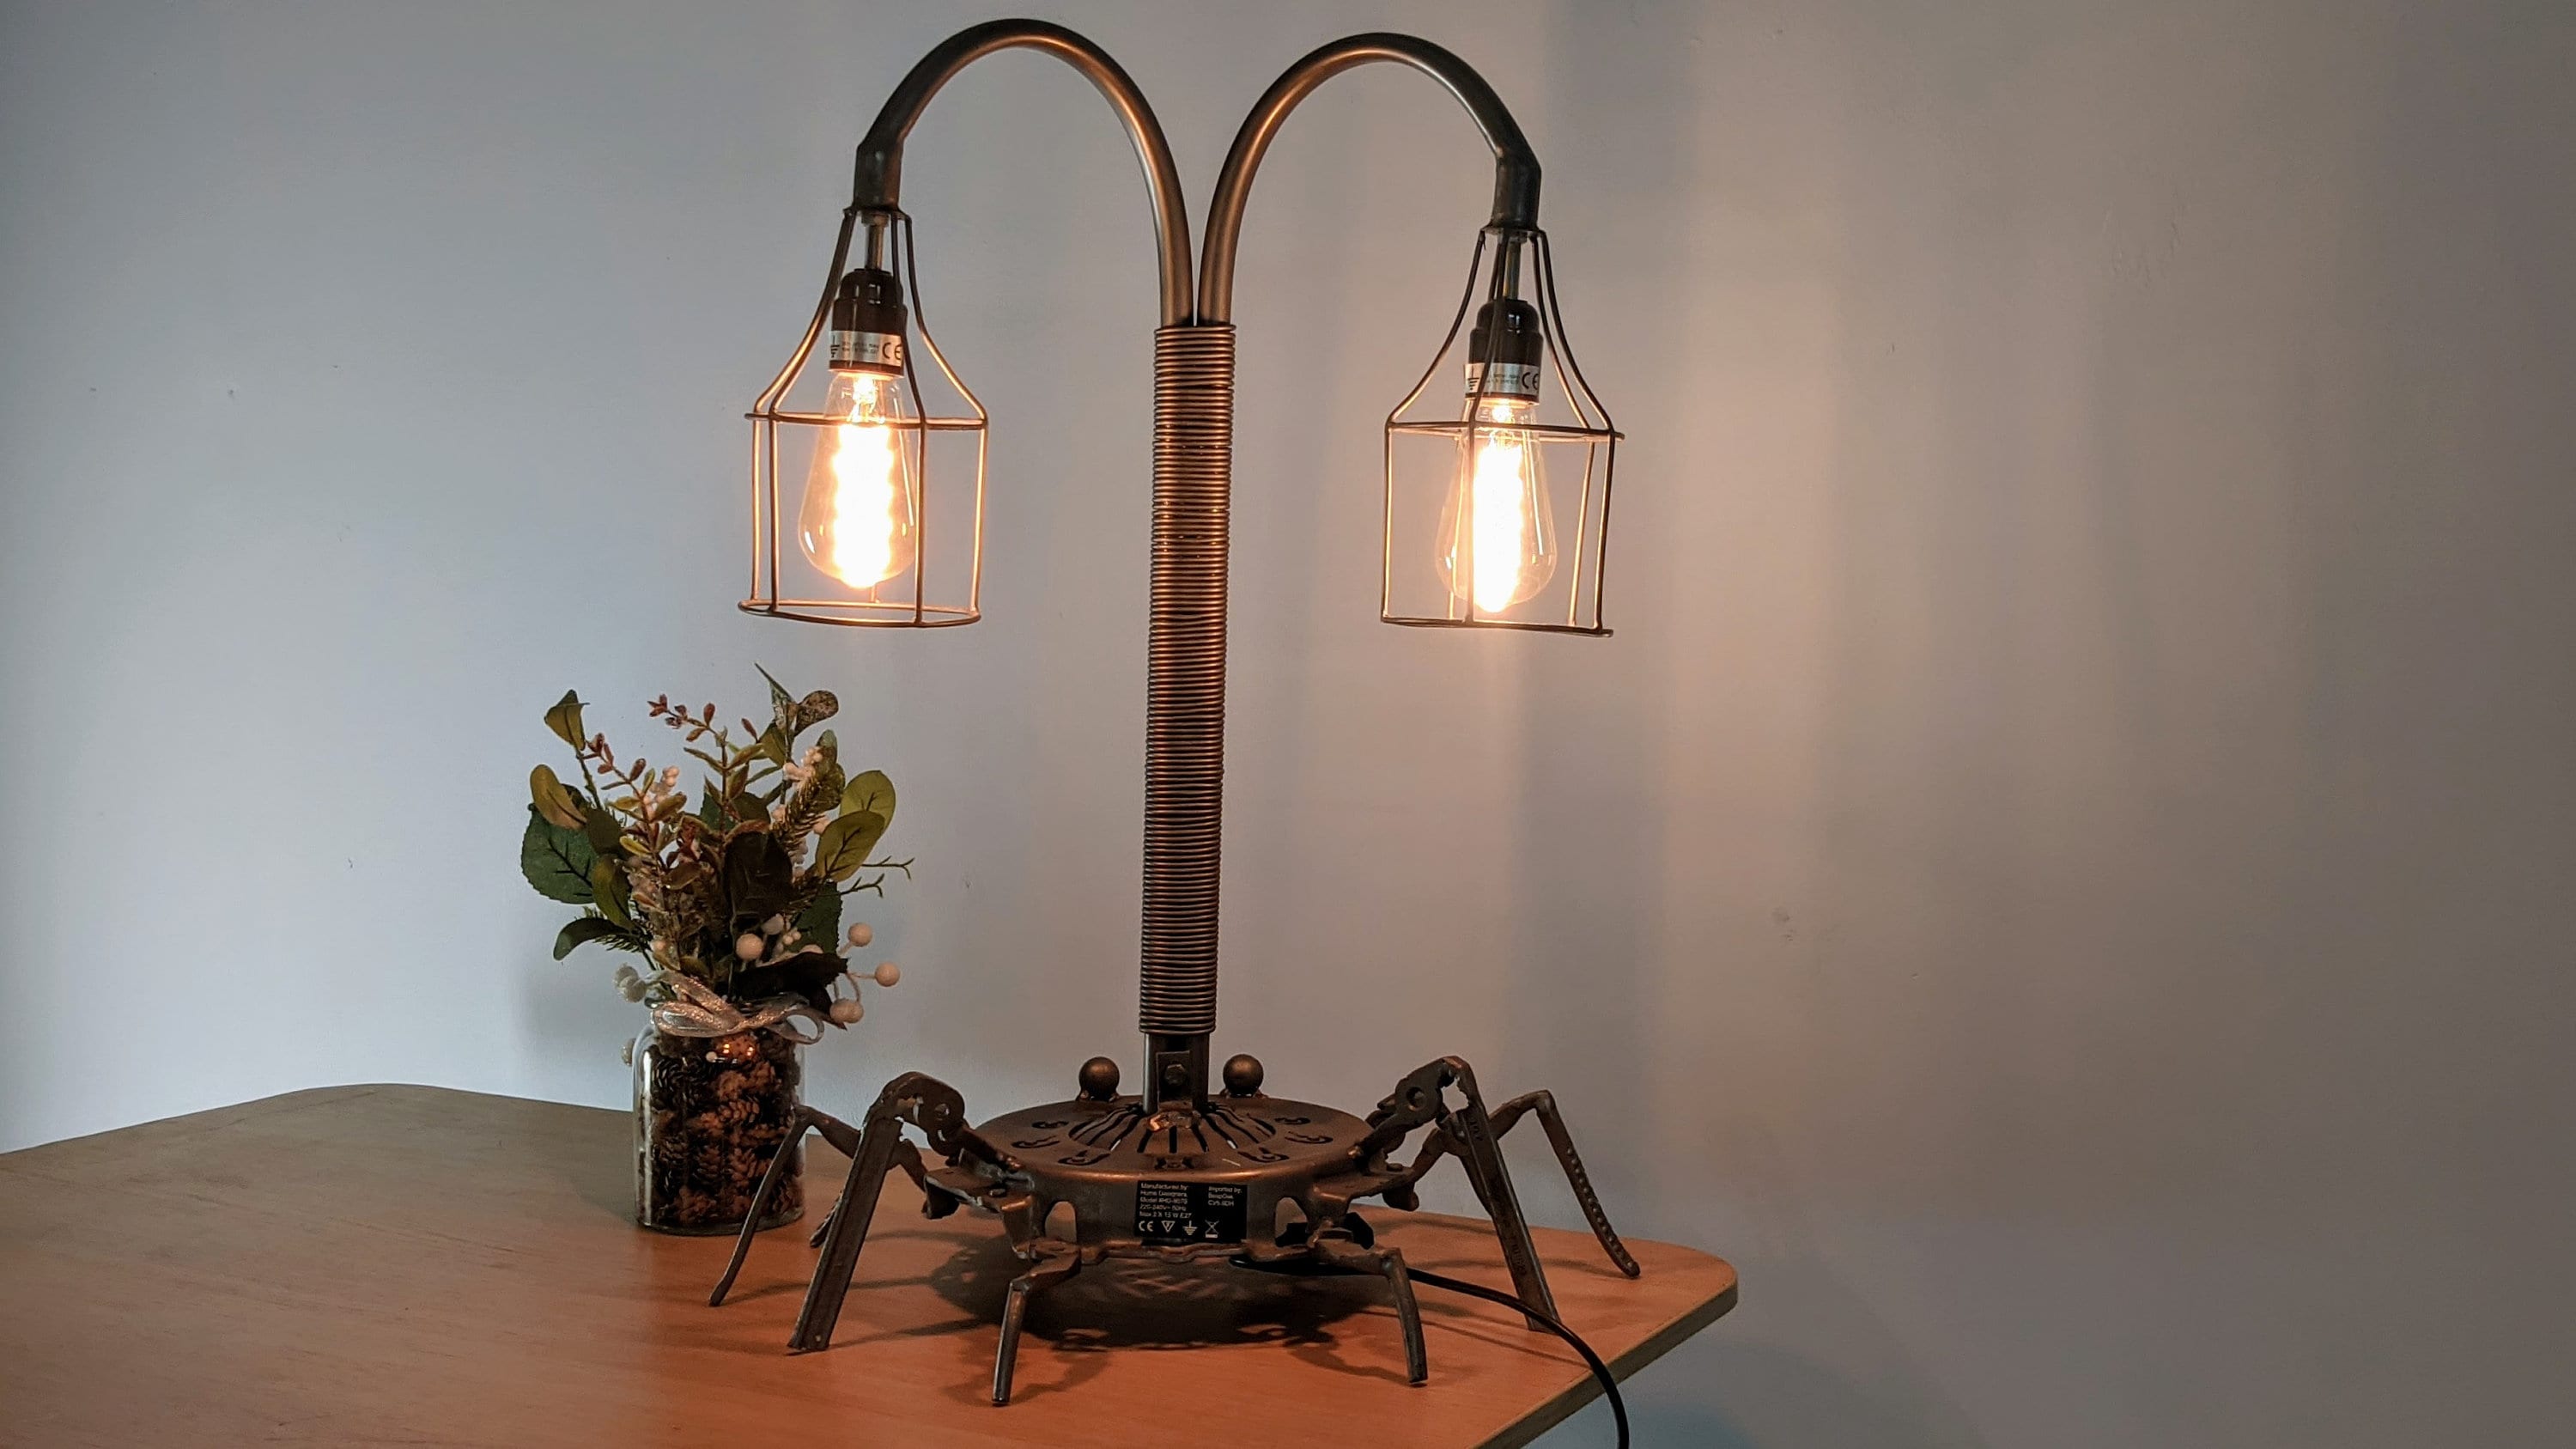 Stylish Side Table Lamp, a versatile industrial light for any room.